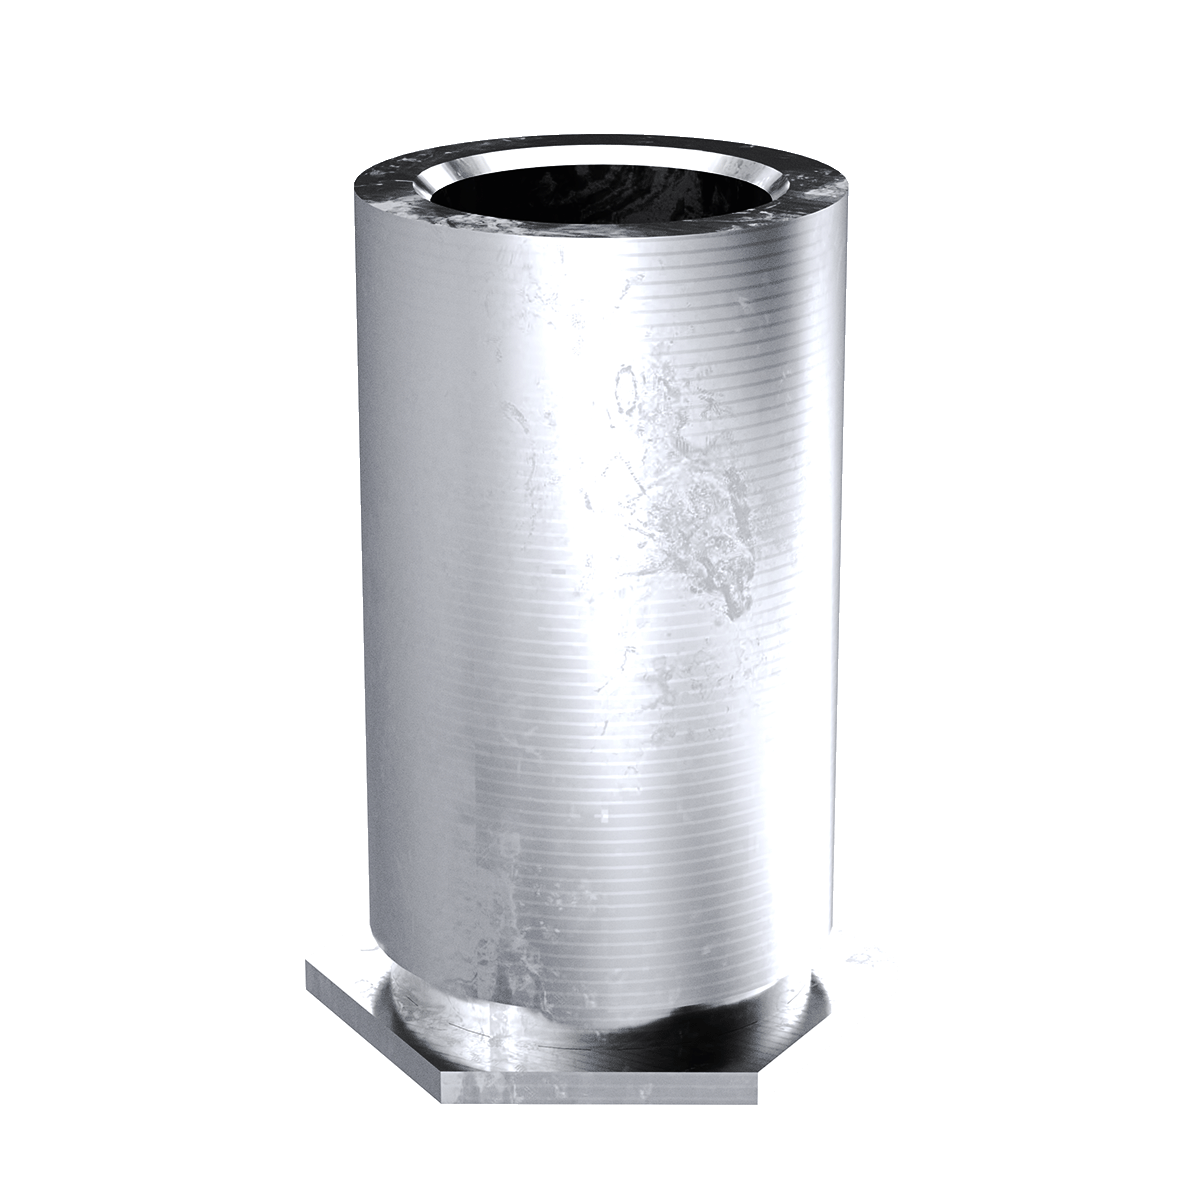 Self-Clinching Standoff, Through Unthreaded, 300 Series Stainless Steel, Passivated, 0.116 x 0.437, 100 Pack